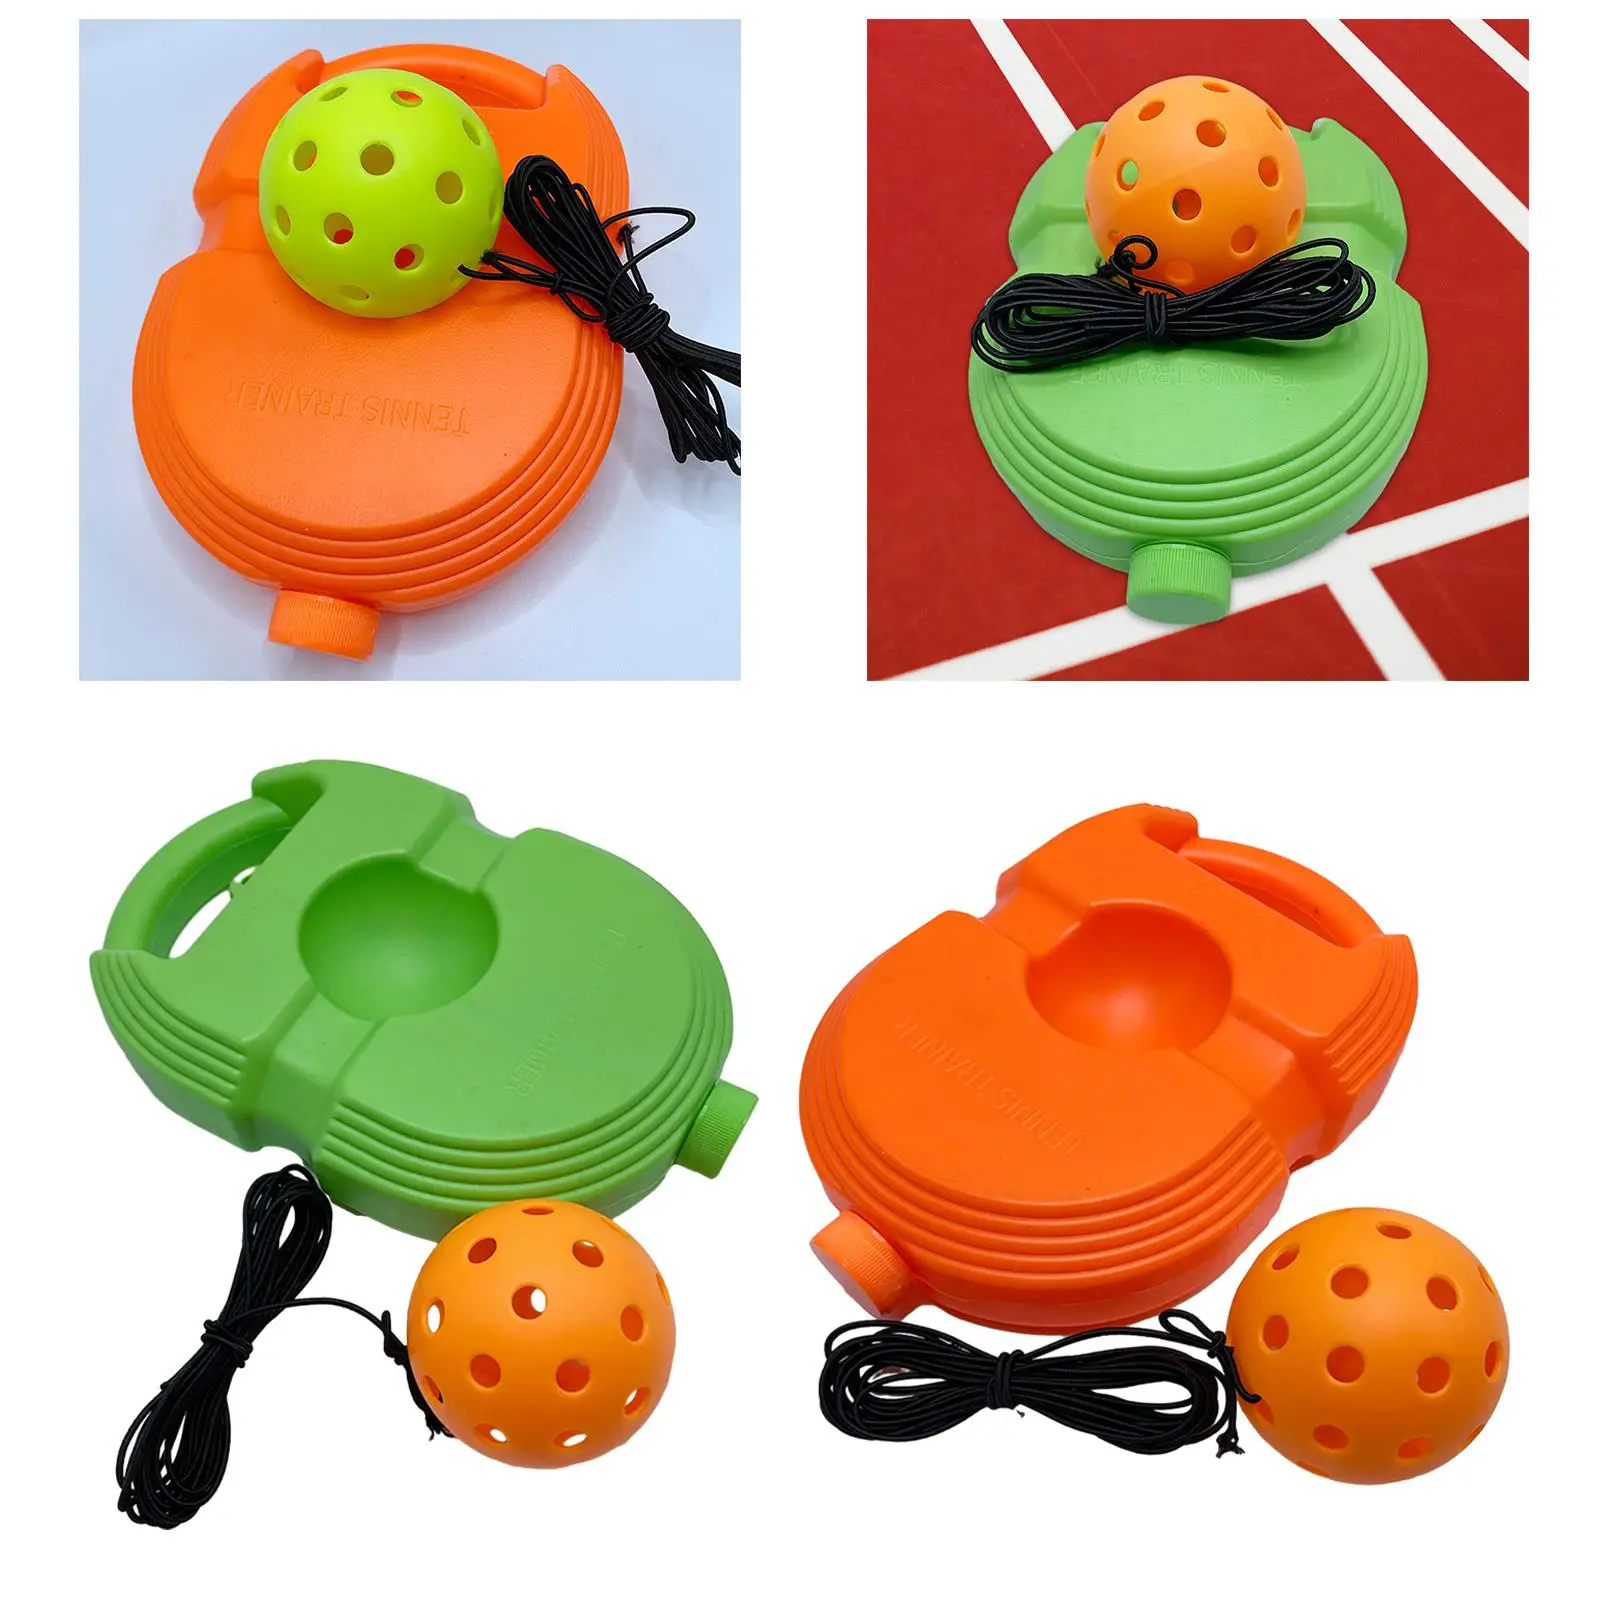 Solo Tennis Training Improve Speed Partner Sparring Device Tennis Trainer